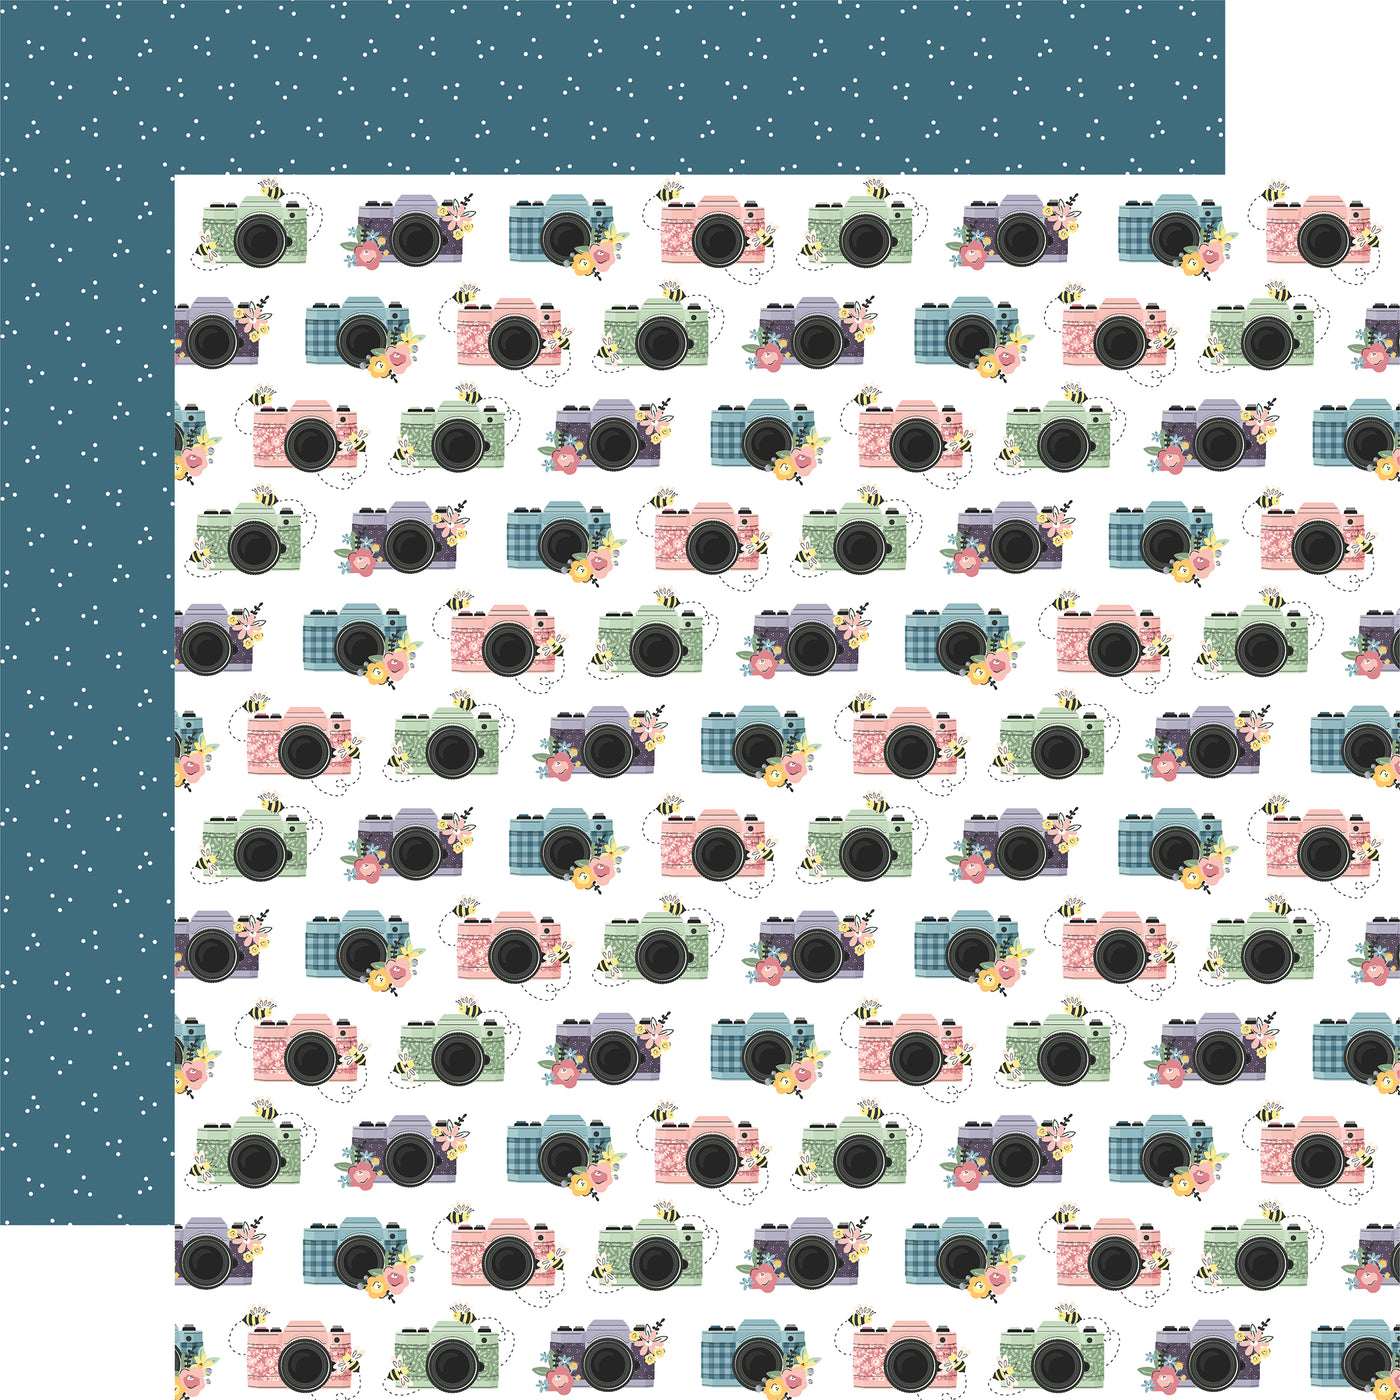 The front side of this paper is full of pastel-colored cameras. The reverse side is navy with white dots in triangle shapes.